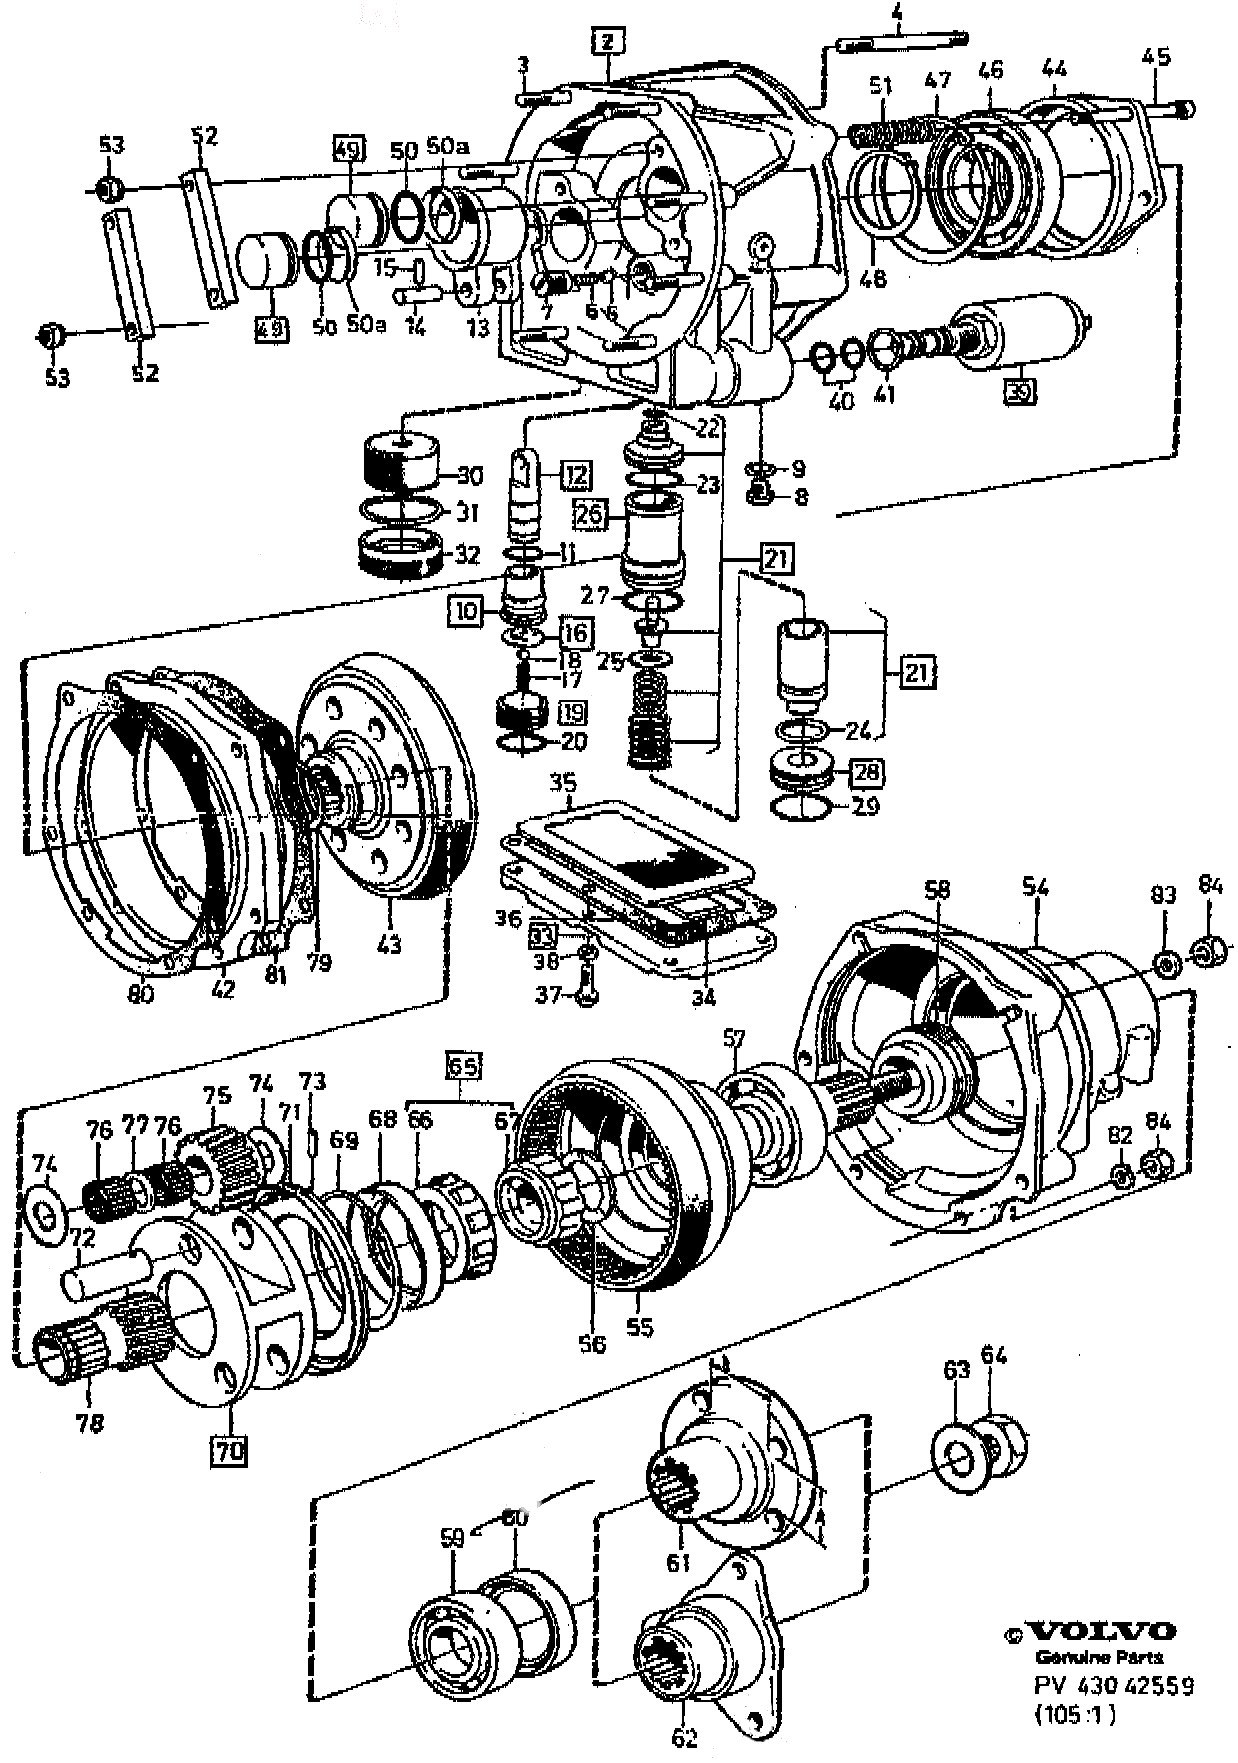 Engine Parts Diagram with Names Volvo Parts Schematic Wiring Diagram Of Engine Parts Diagram with Names